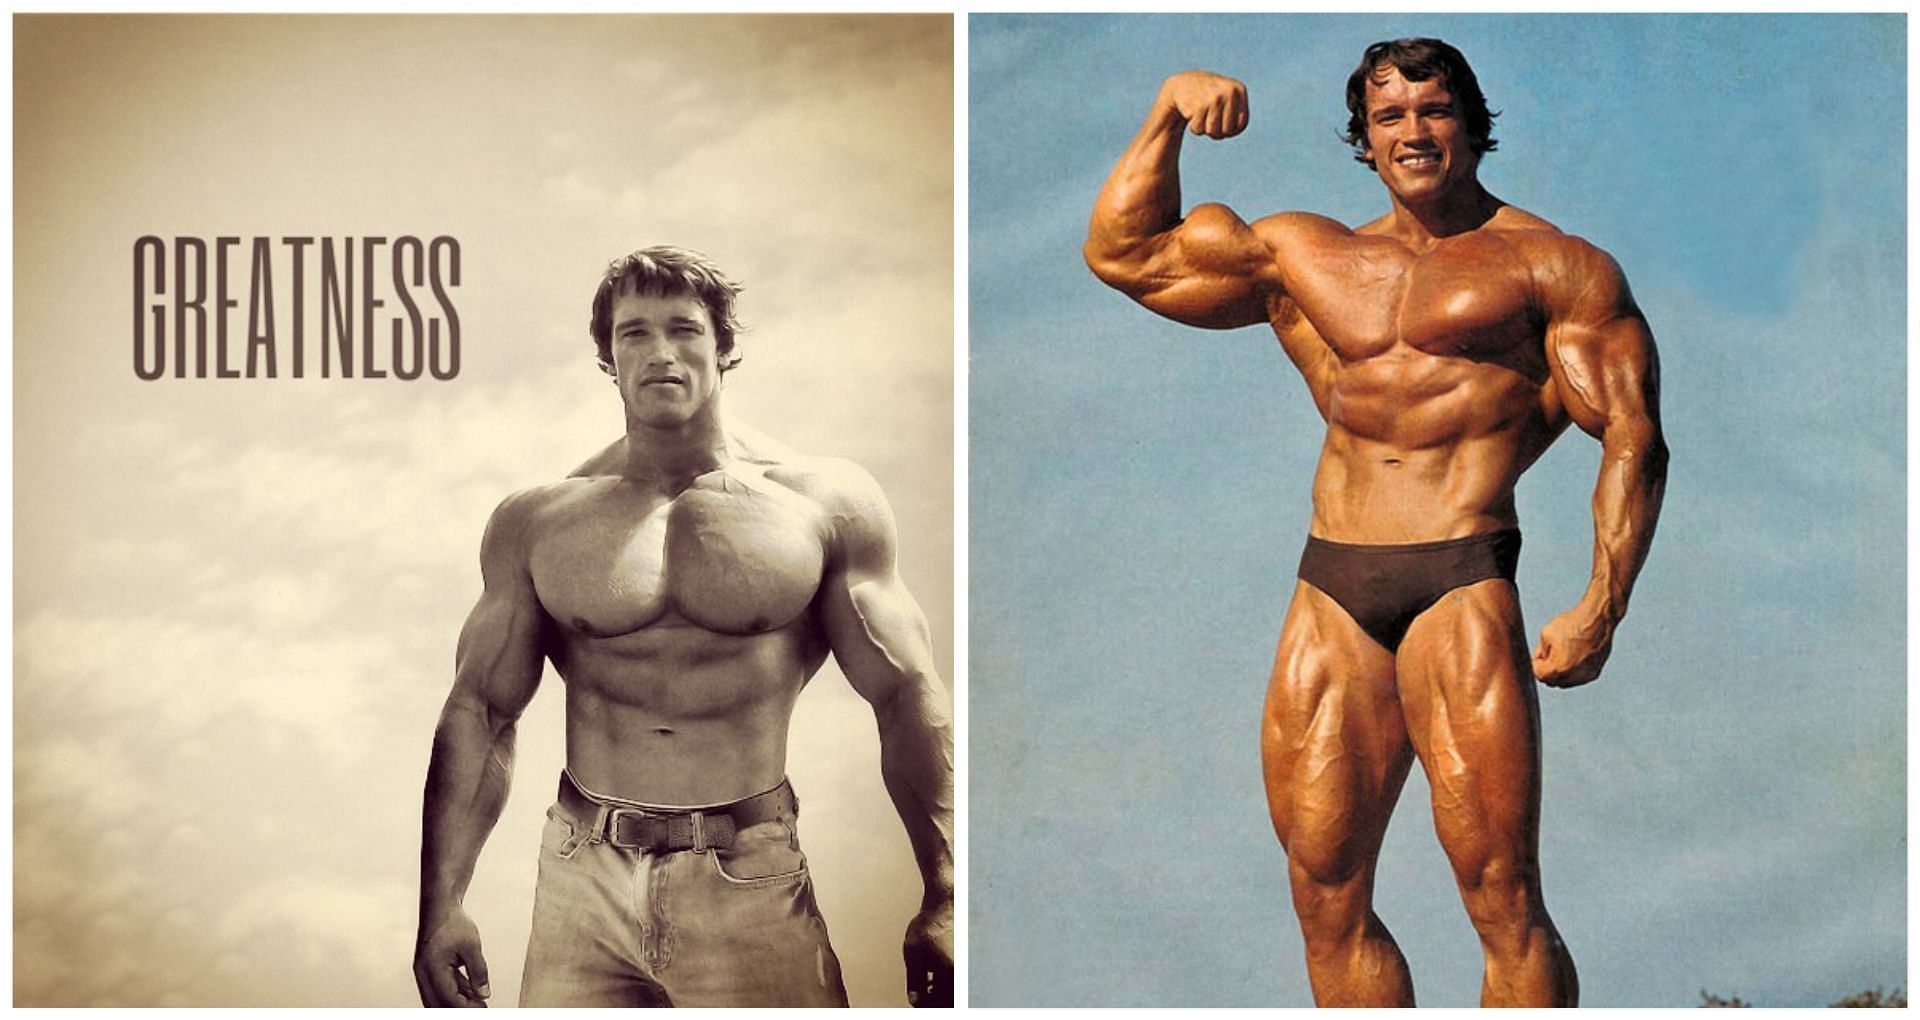 Bodybuilding legend Arnold Schwarzenegger had an unbelievable chest circumference of 57 inches at the peak of his bodybuilding career (Image via Flickr)